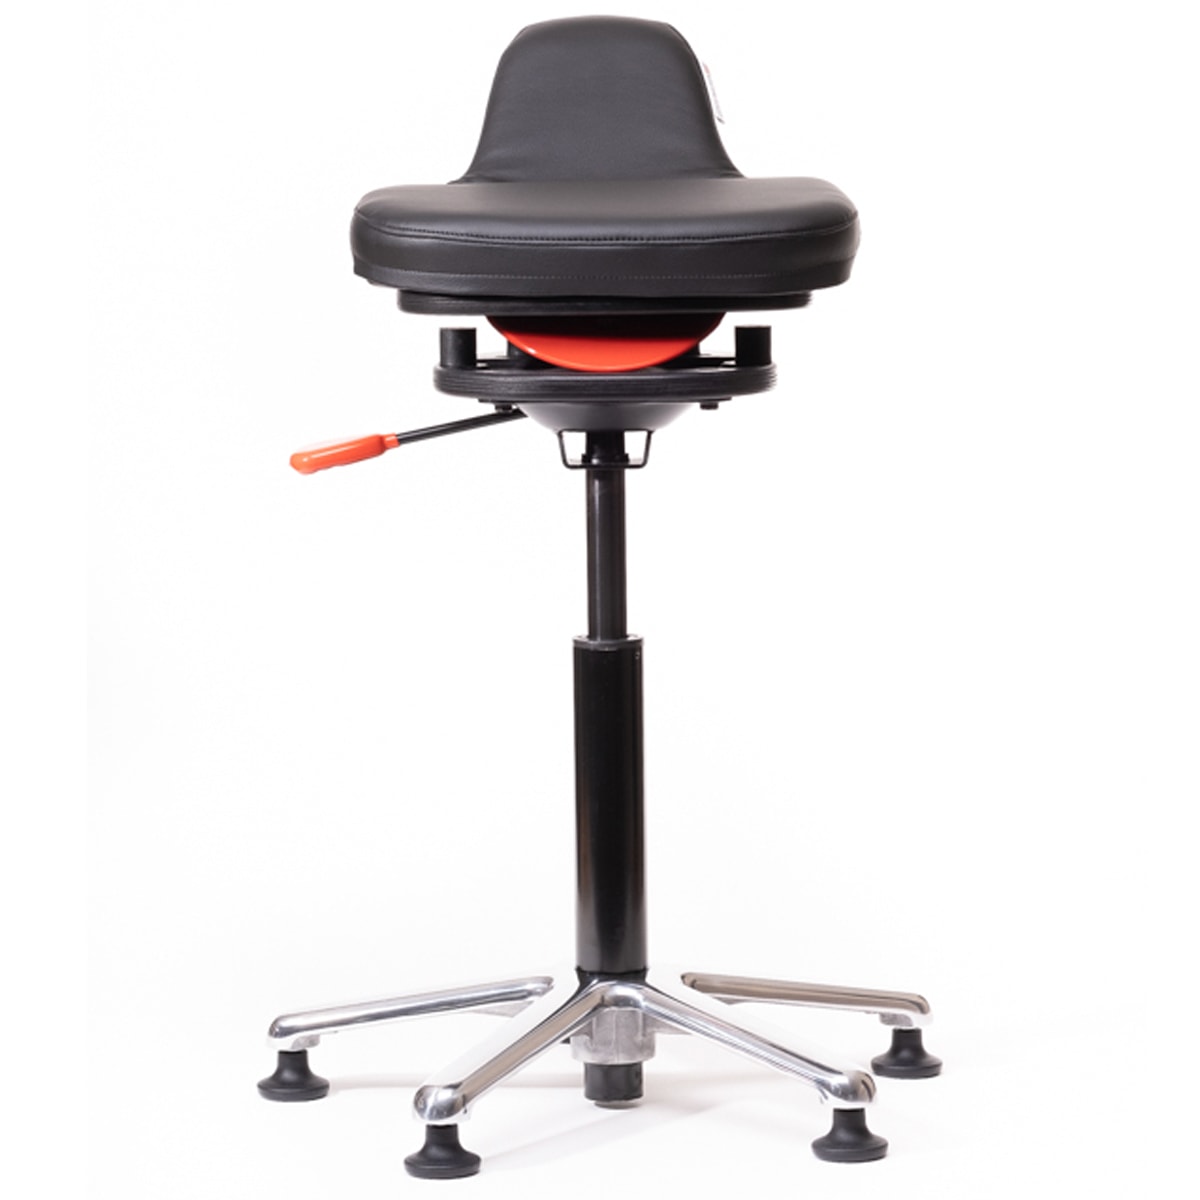 https://www.workwhilewalking.com/wp-content/uploads/2022/12/ariel-black-performance-leather-active-chair.jpeg